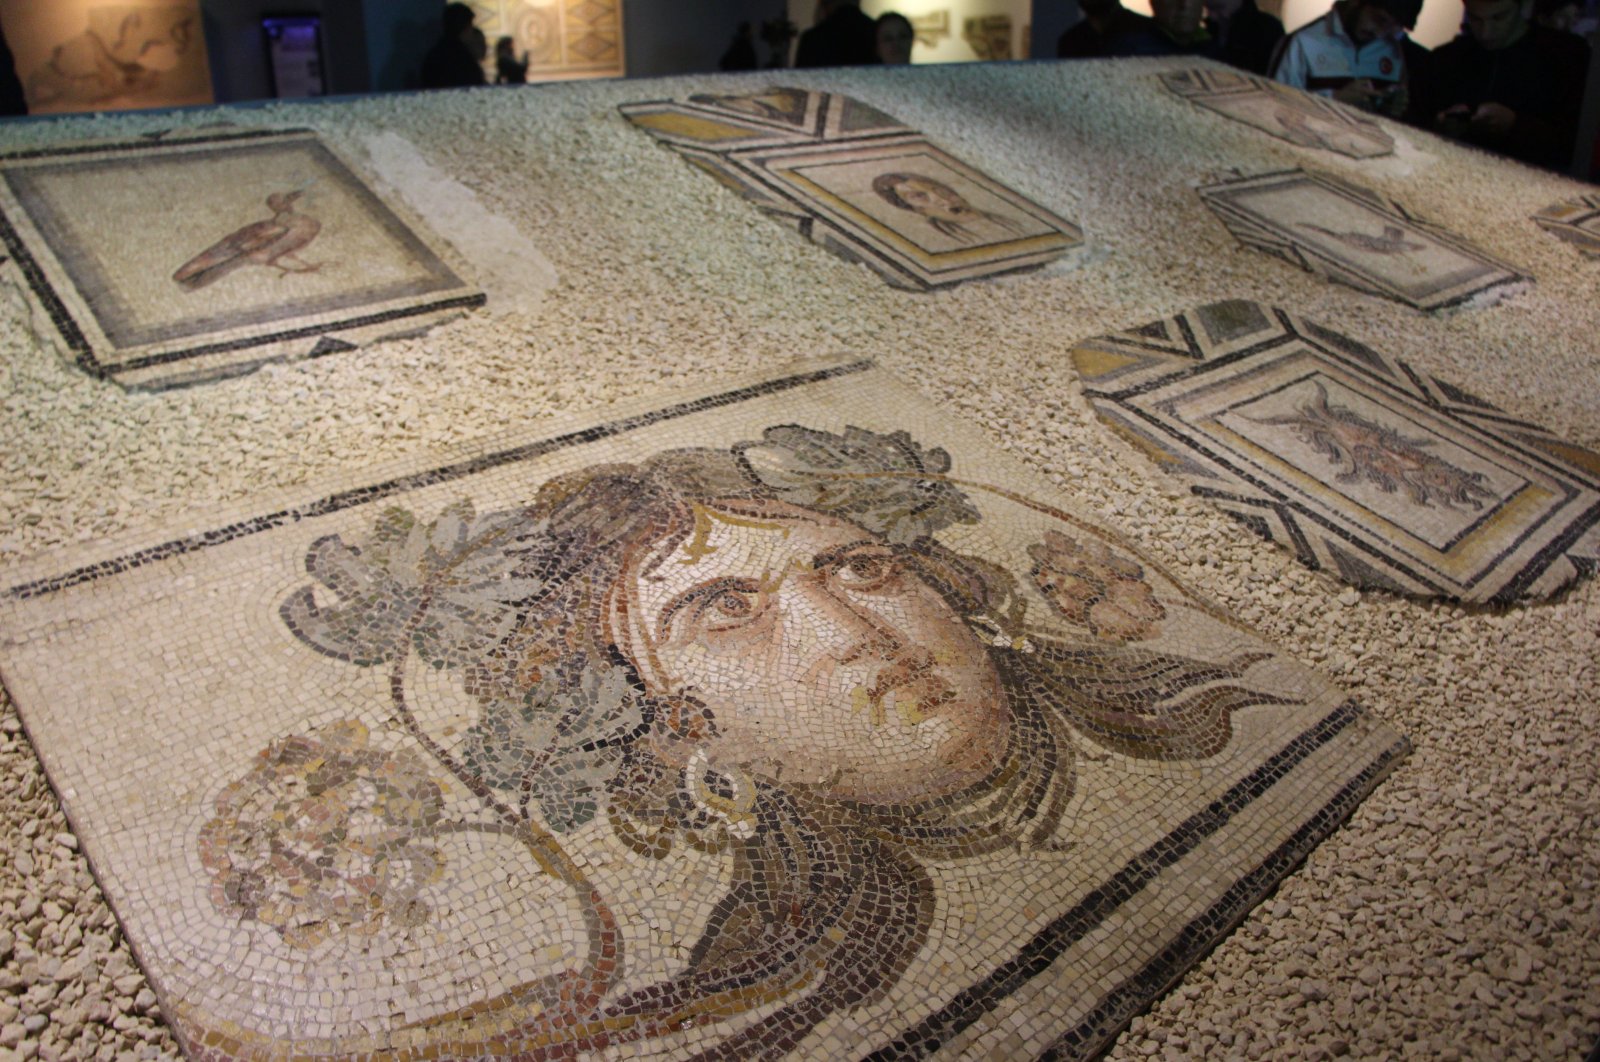 Pieces of "Gypsy Girl," a famed mosaic brought back from the United States in 2018, on display at a museum in Gaziantep, southern Turkey, Sept. 12, 2018. (DHA PHOTO)